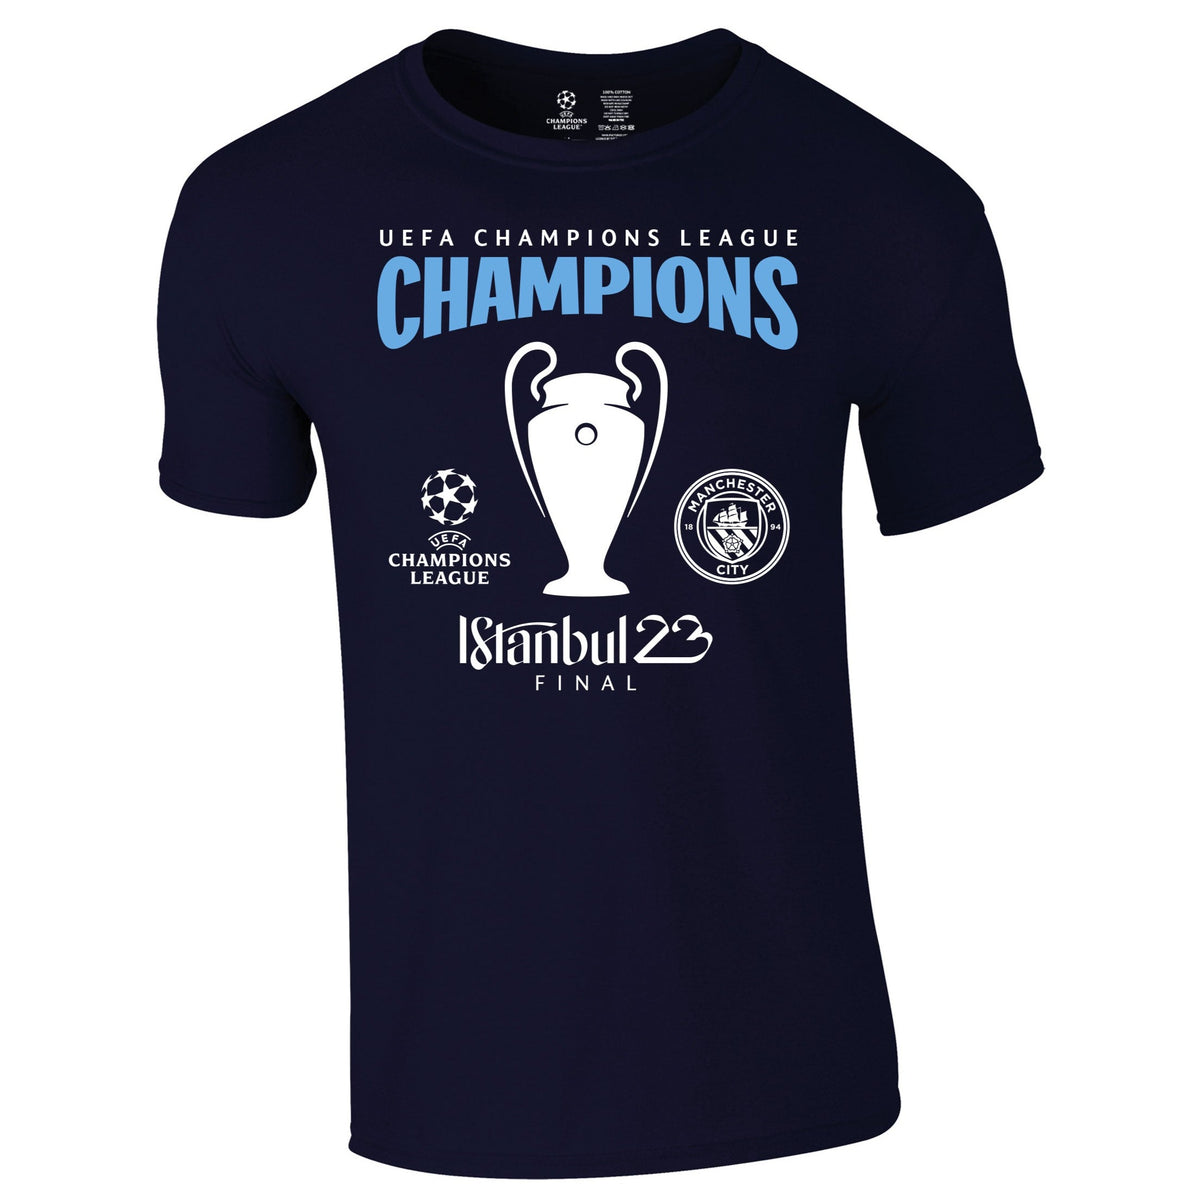 Champions League Manchester City Champions Starball T-Shirt Navy